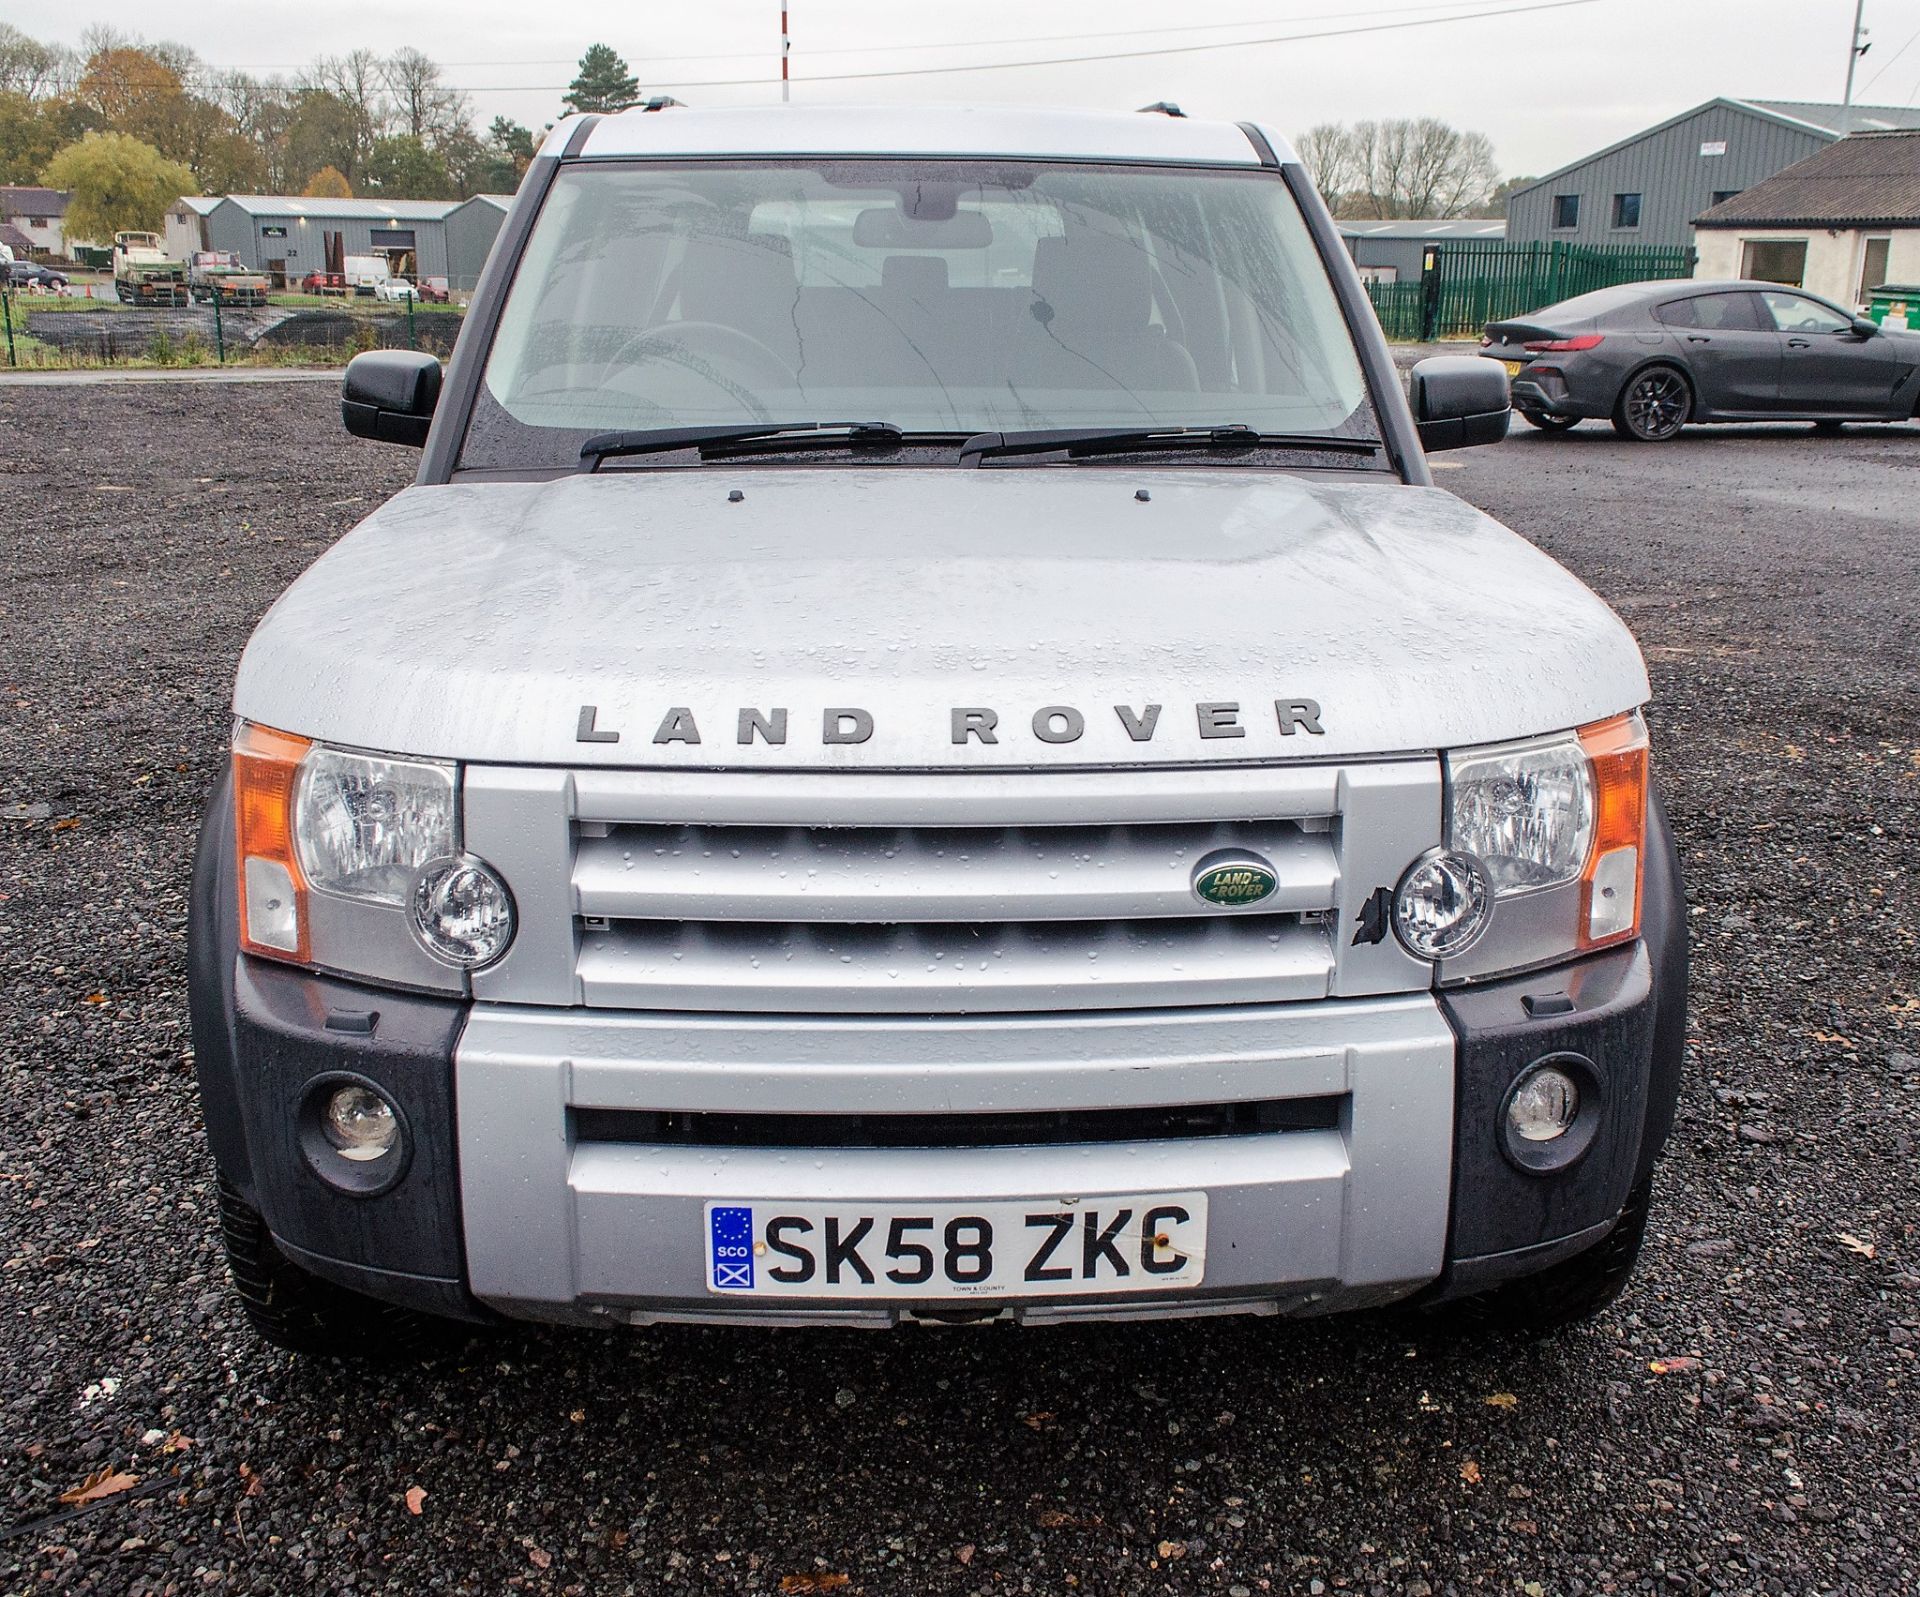 Land Rover Discovery 3 TDV6 XS 5 door 4wd estate car Registration Number: SK58 ZKC Date of - Image 5 of 31